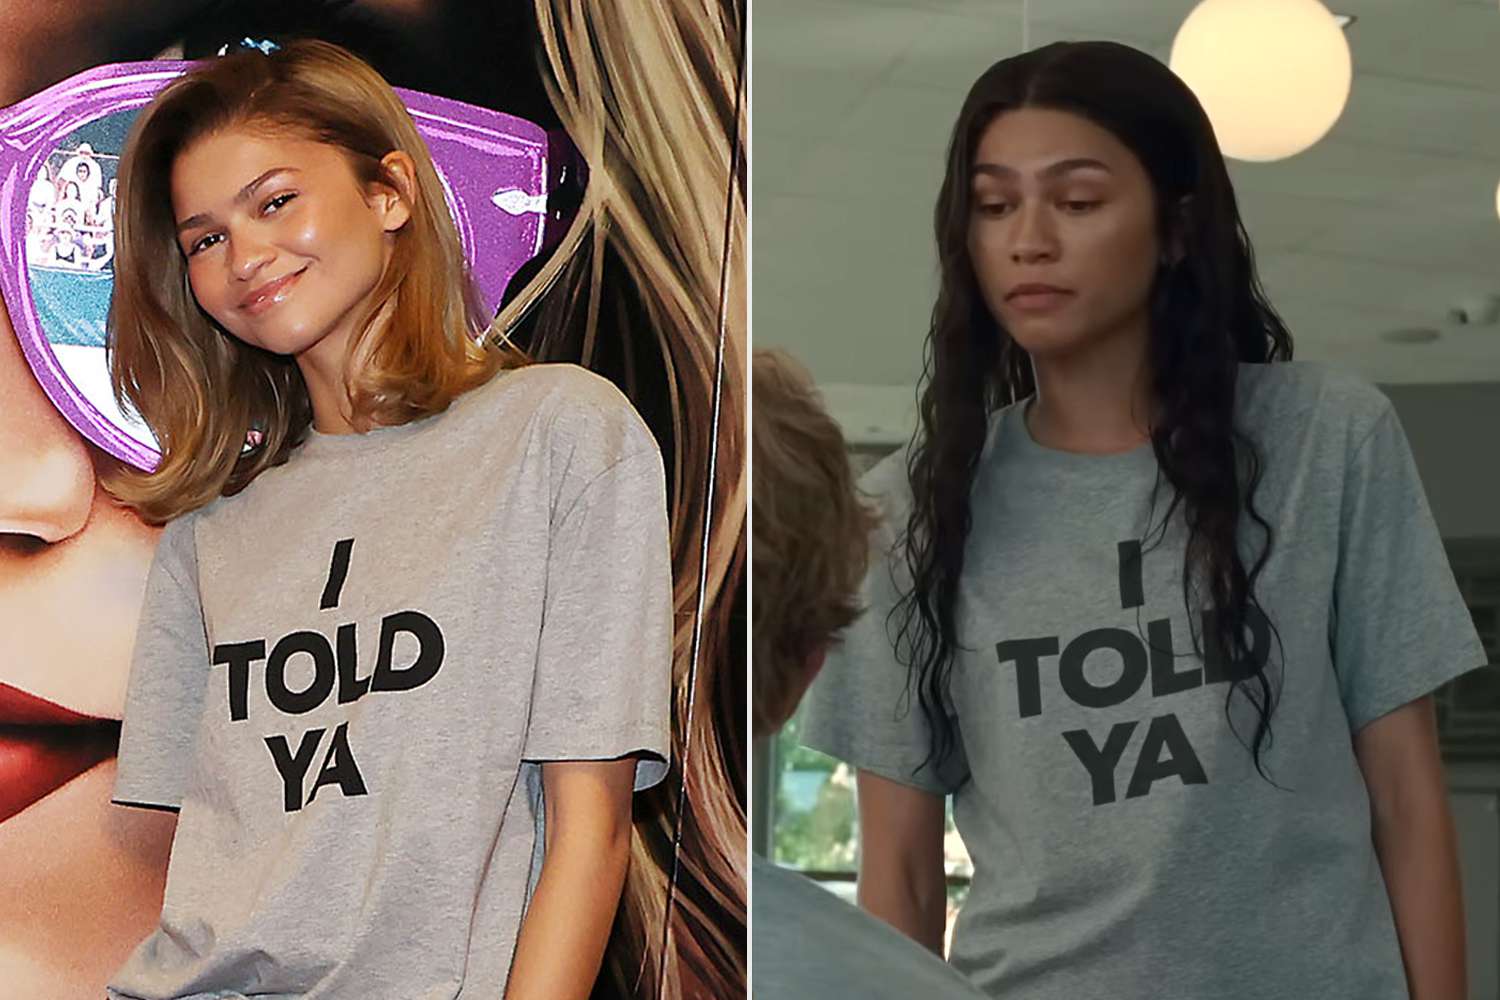 Zendaya Steps Out in ‘I Told Ya’ Shirt from “Challengers” – Which Has Surprising Link to the Kennedys